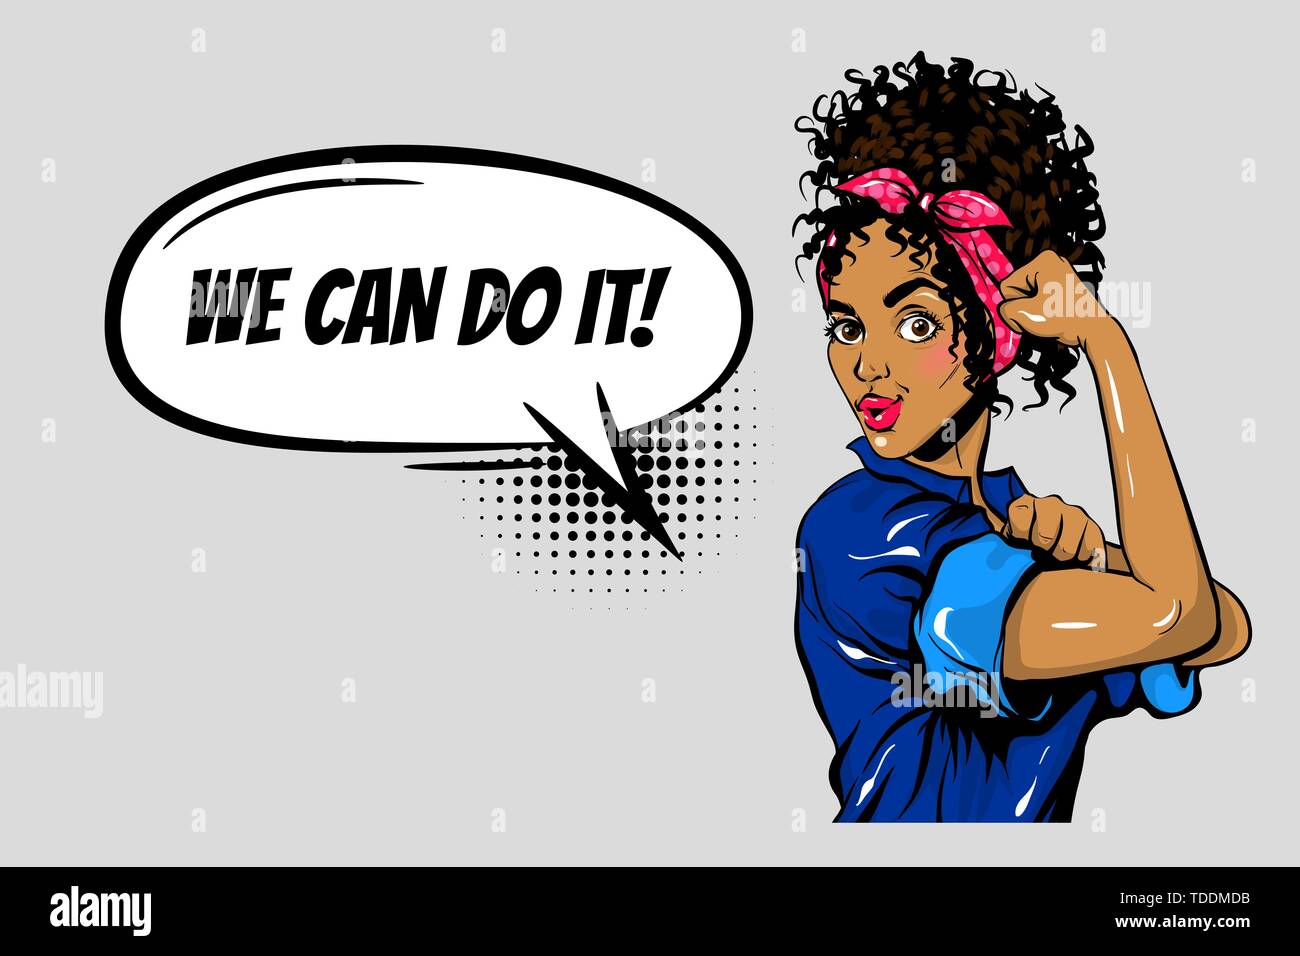 We can do it black woman girl power pop art vector illustration. Afro arm fist worker rights. Super hero feminism poster Stock Vector